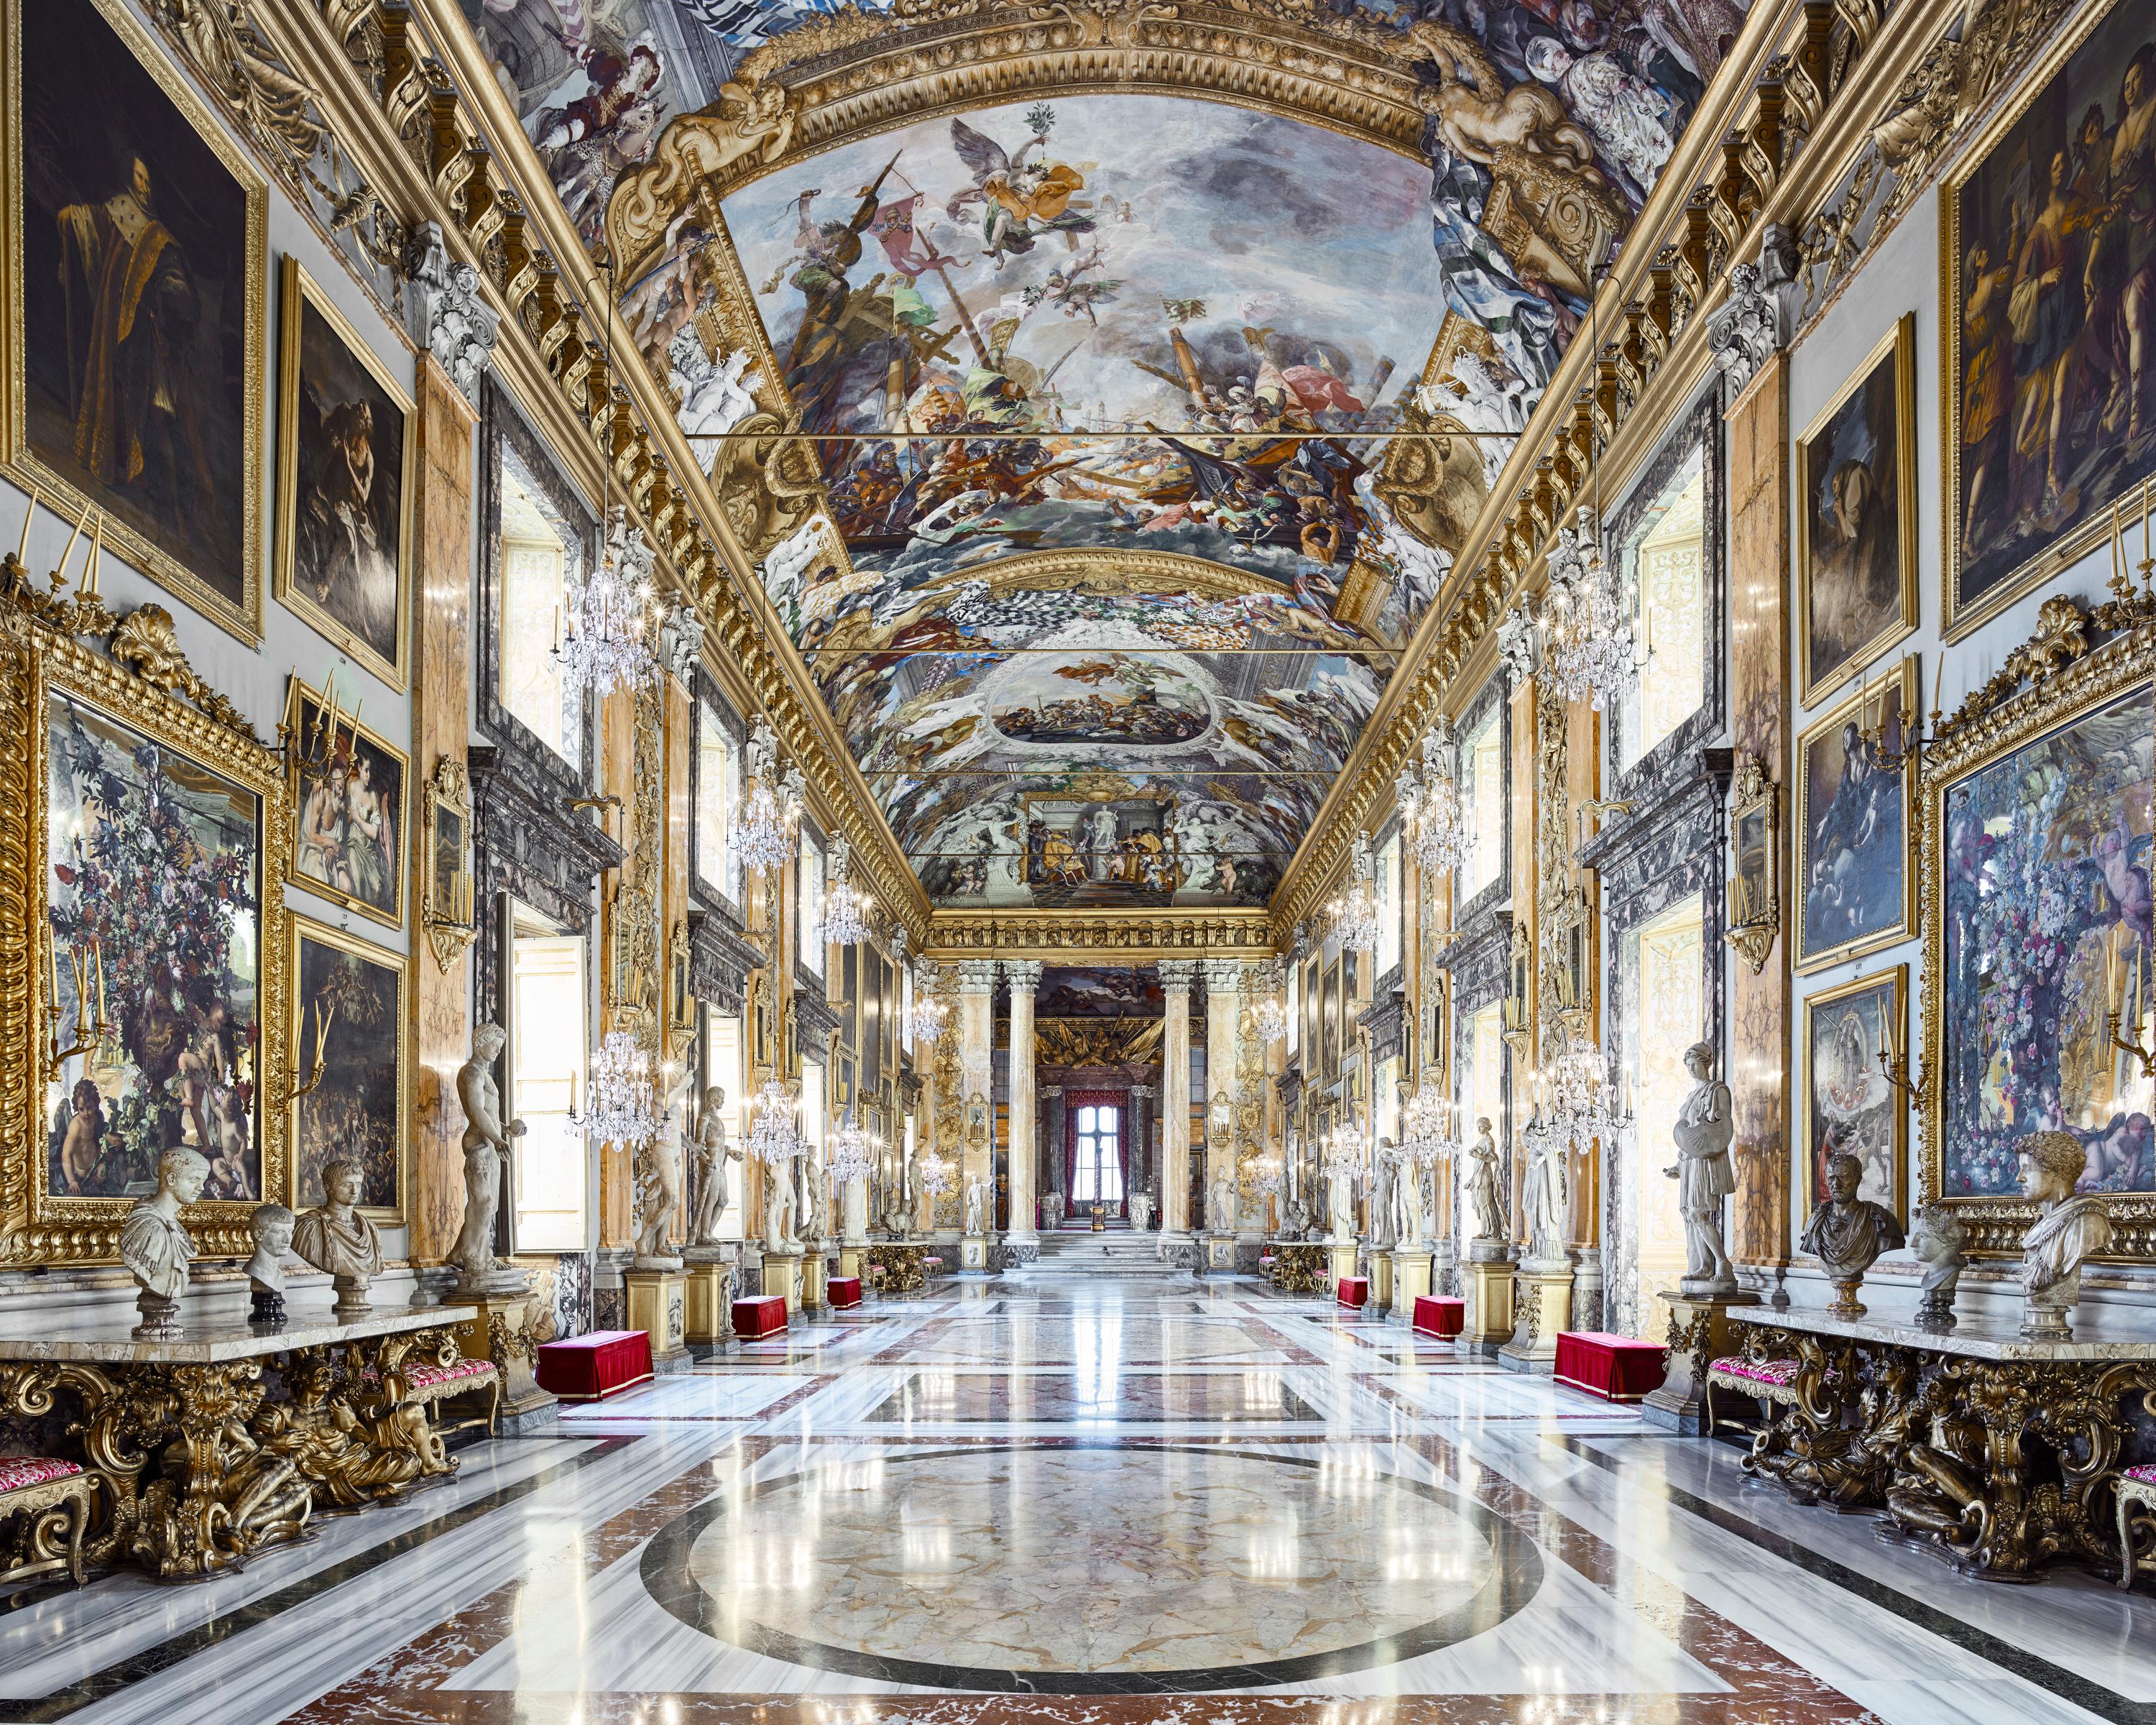 David Burdeny - Galleria, Palazzo Colonna, Rome, Italy, 2016, Printed After